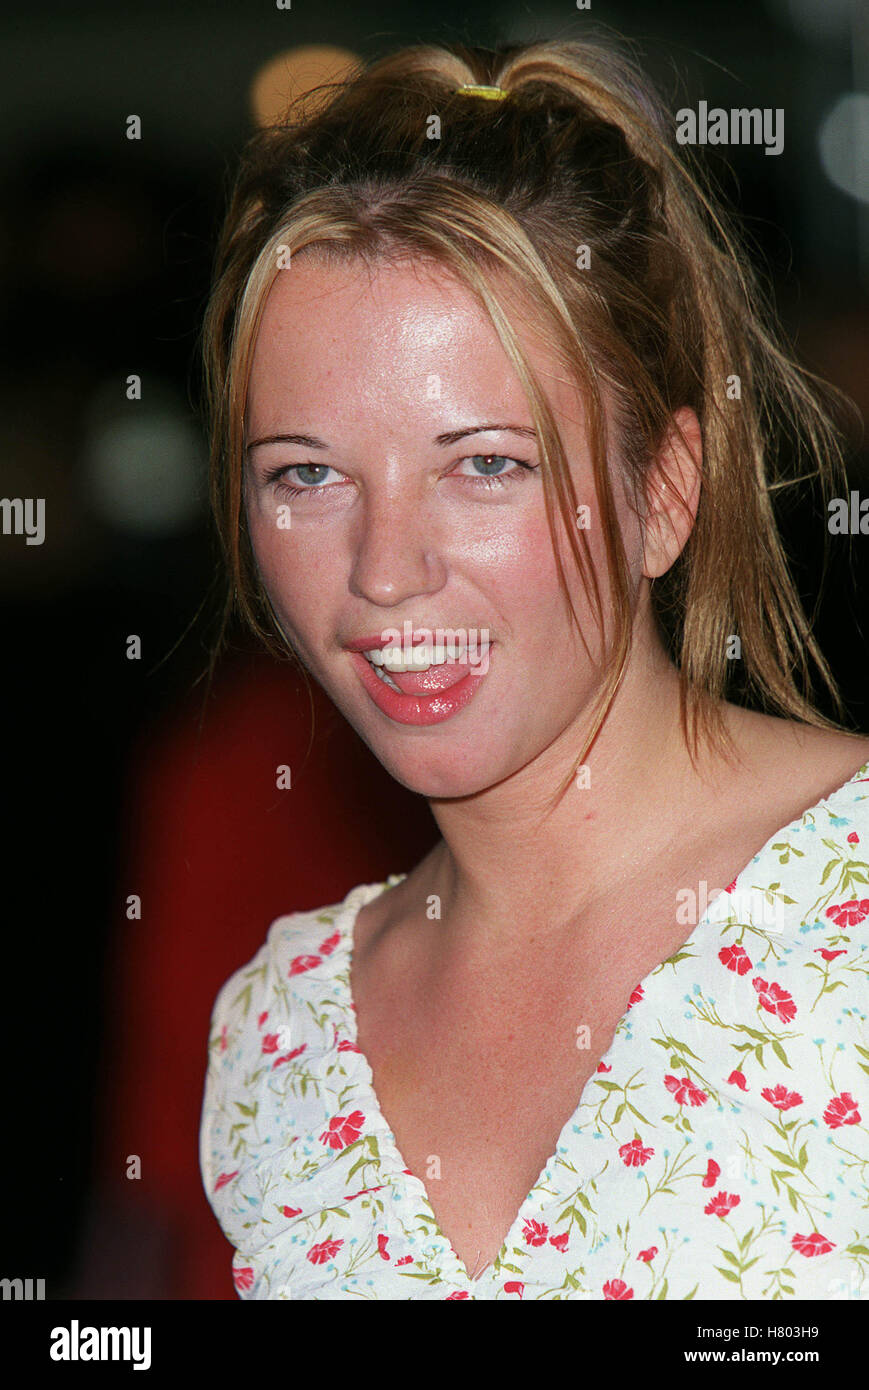 SARA COX SNATCH PREMIERE LONDON THE ODEON LEICESTER SQ LONDON ENGLAND 29 August 2000 Stock Photo